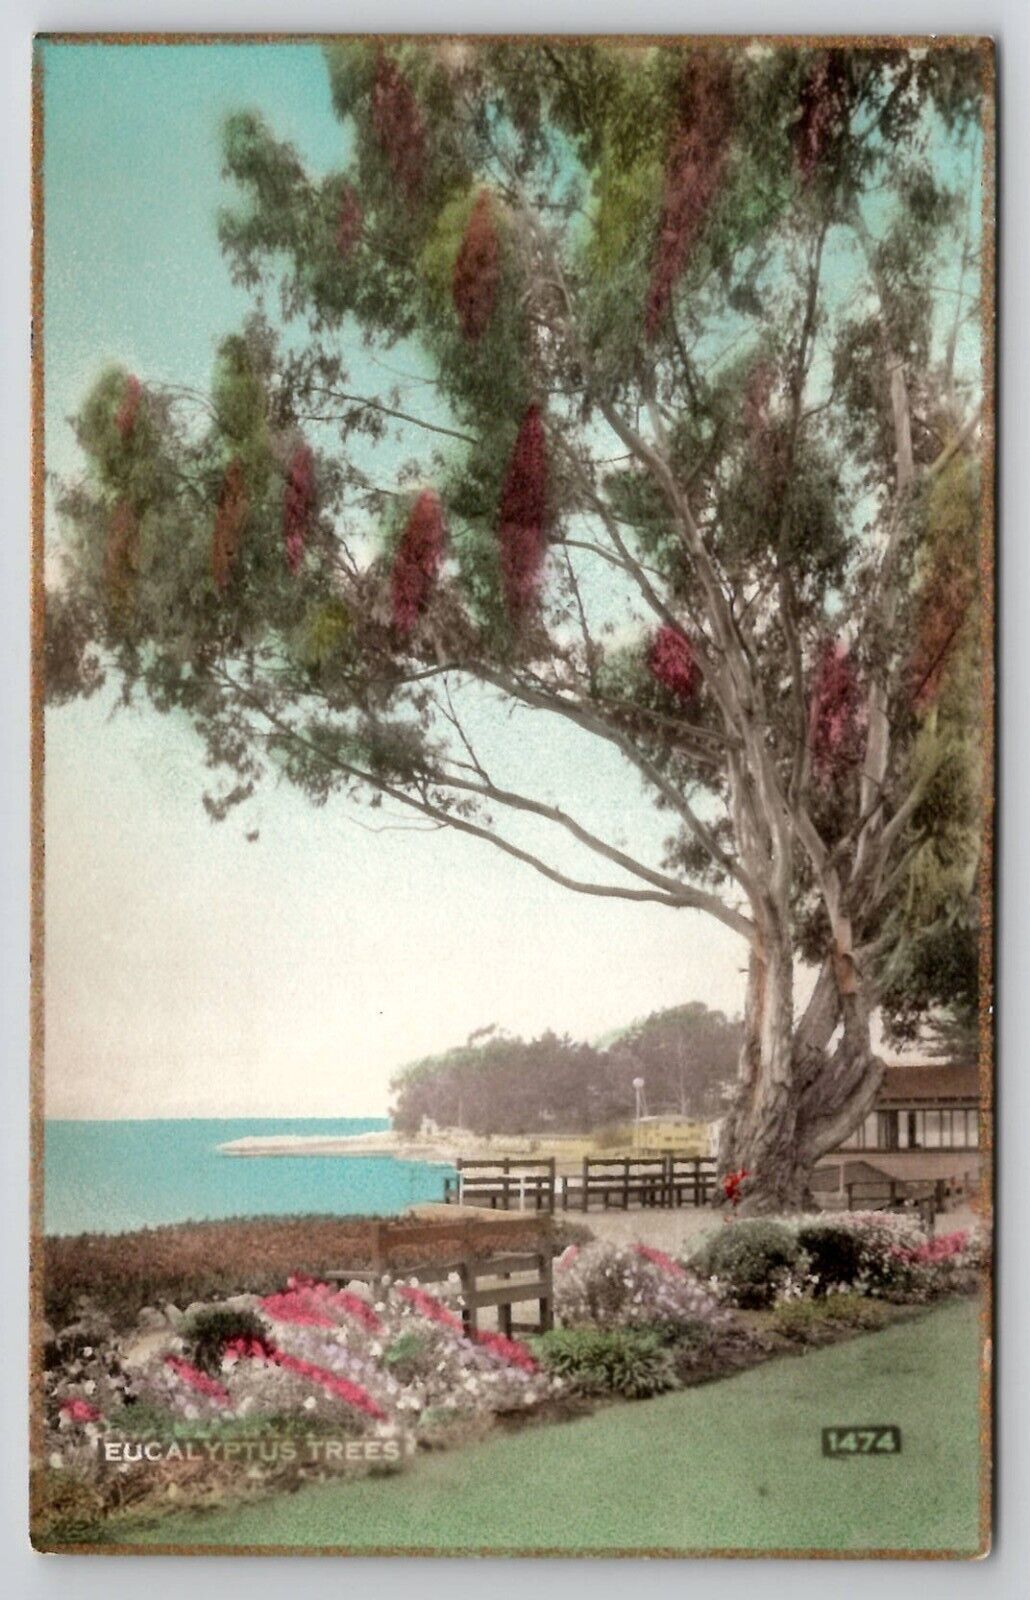 Eucalyptus Trees and Beach Fred Martin Hand Colored Gilded Photo Postcard I30